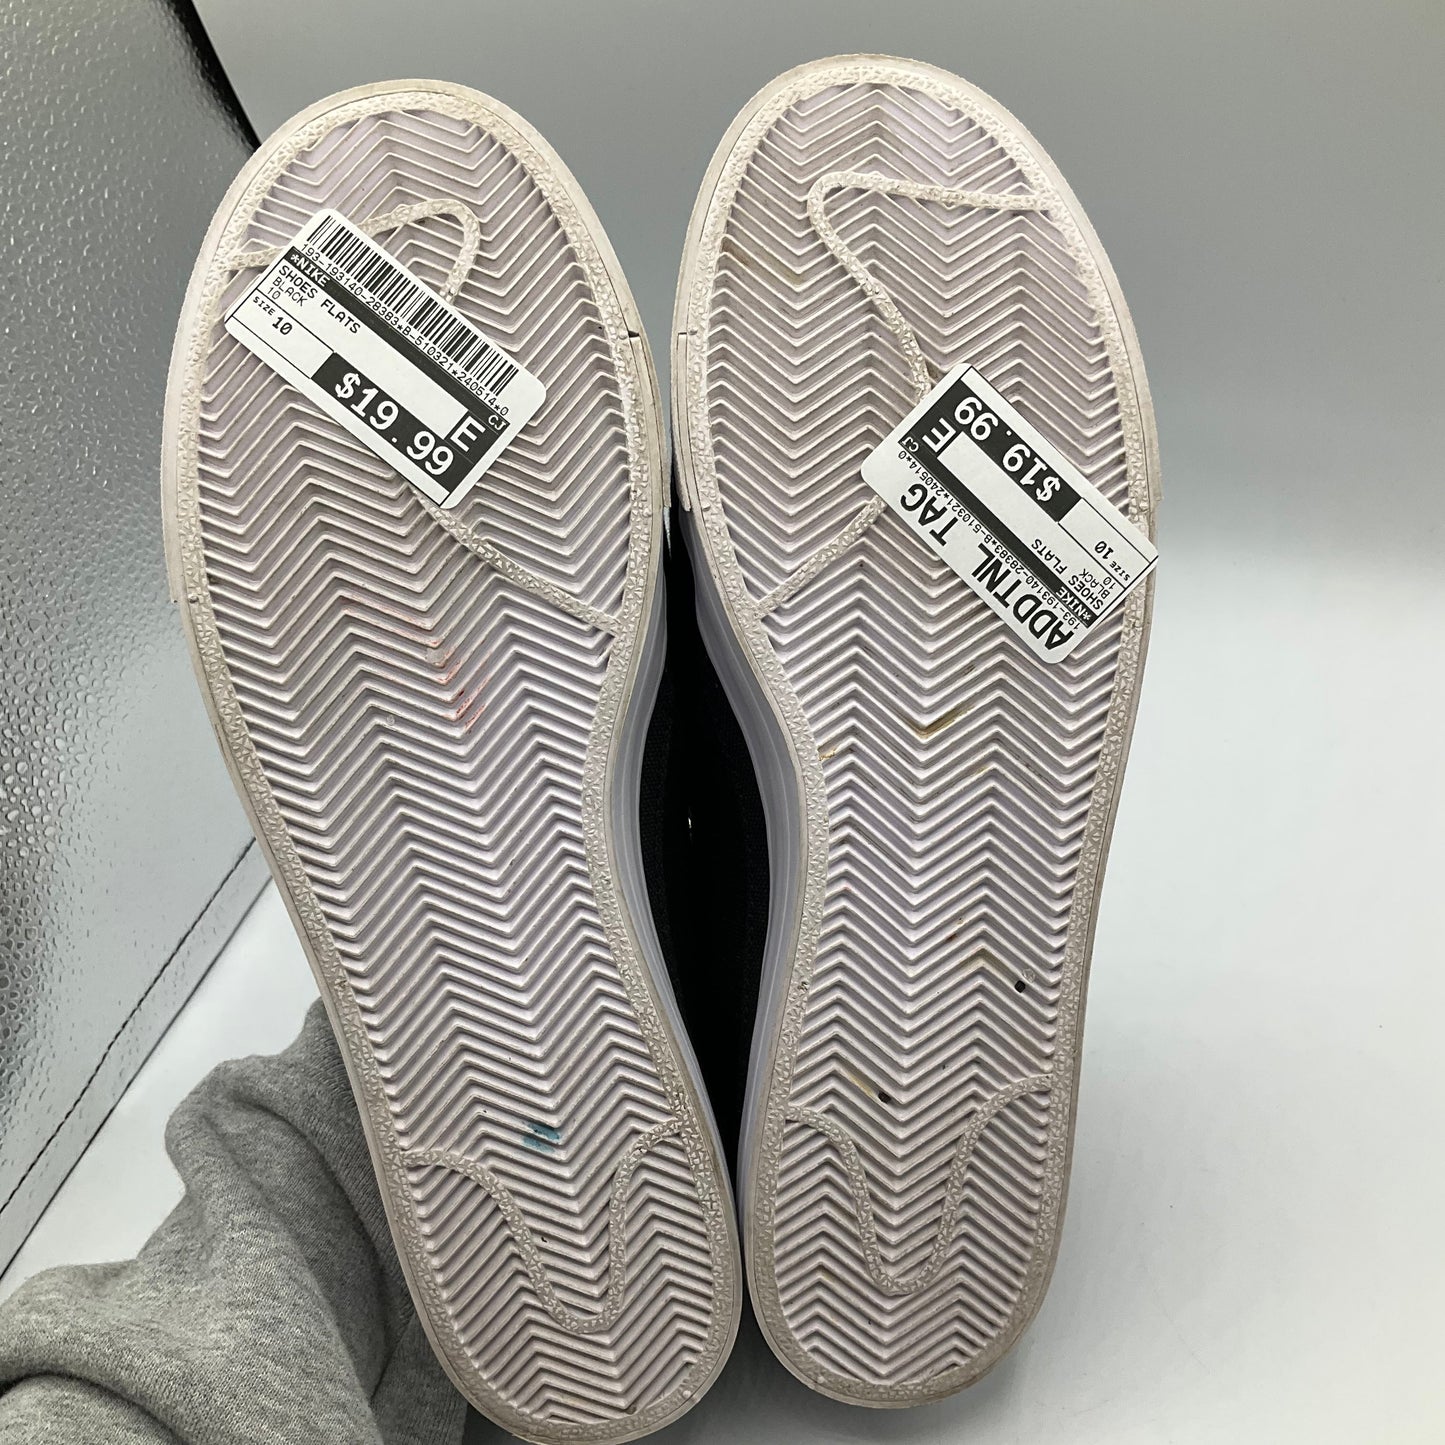 Shoes Flats By Nike  Size: 10